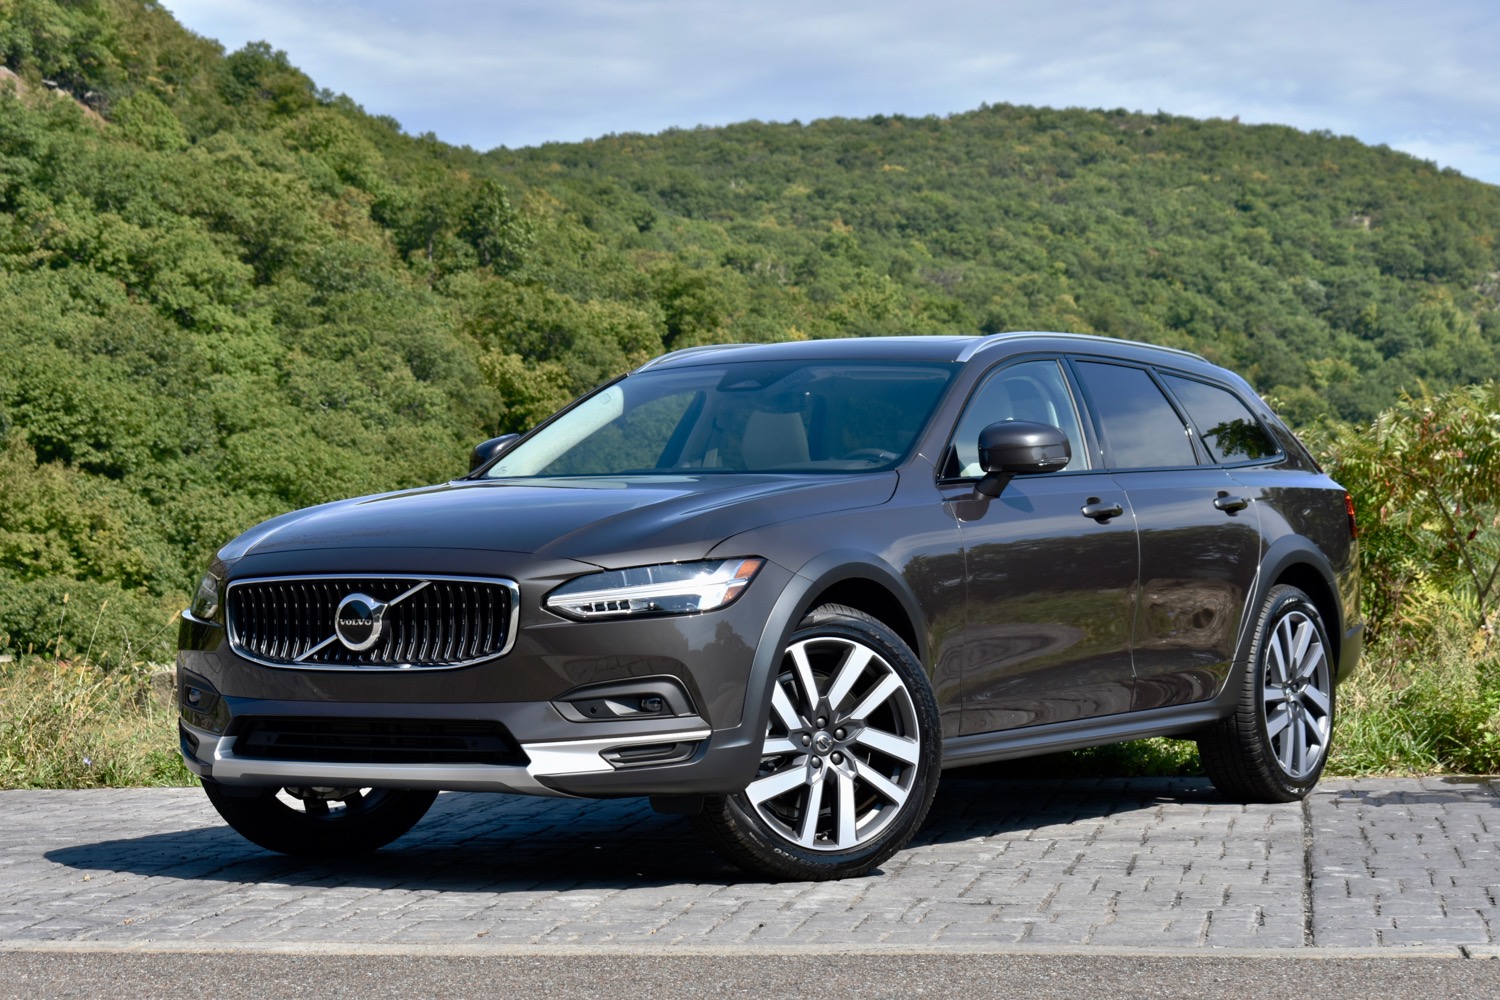 2023 Volvo V60 Cross Country Review: The All-Terrain Swedish Wagon